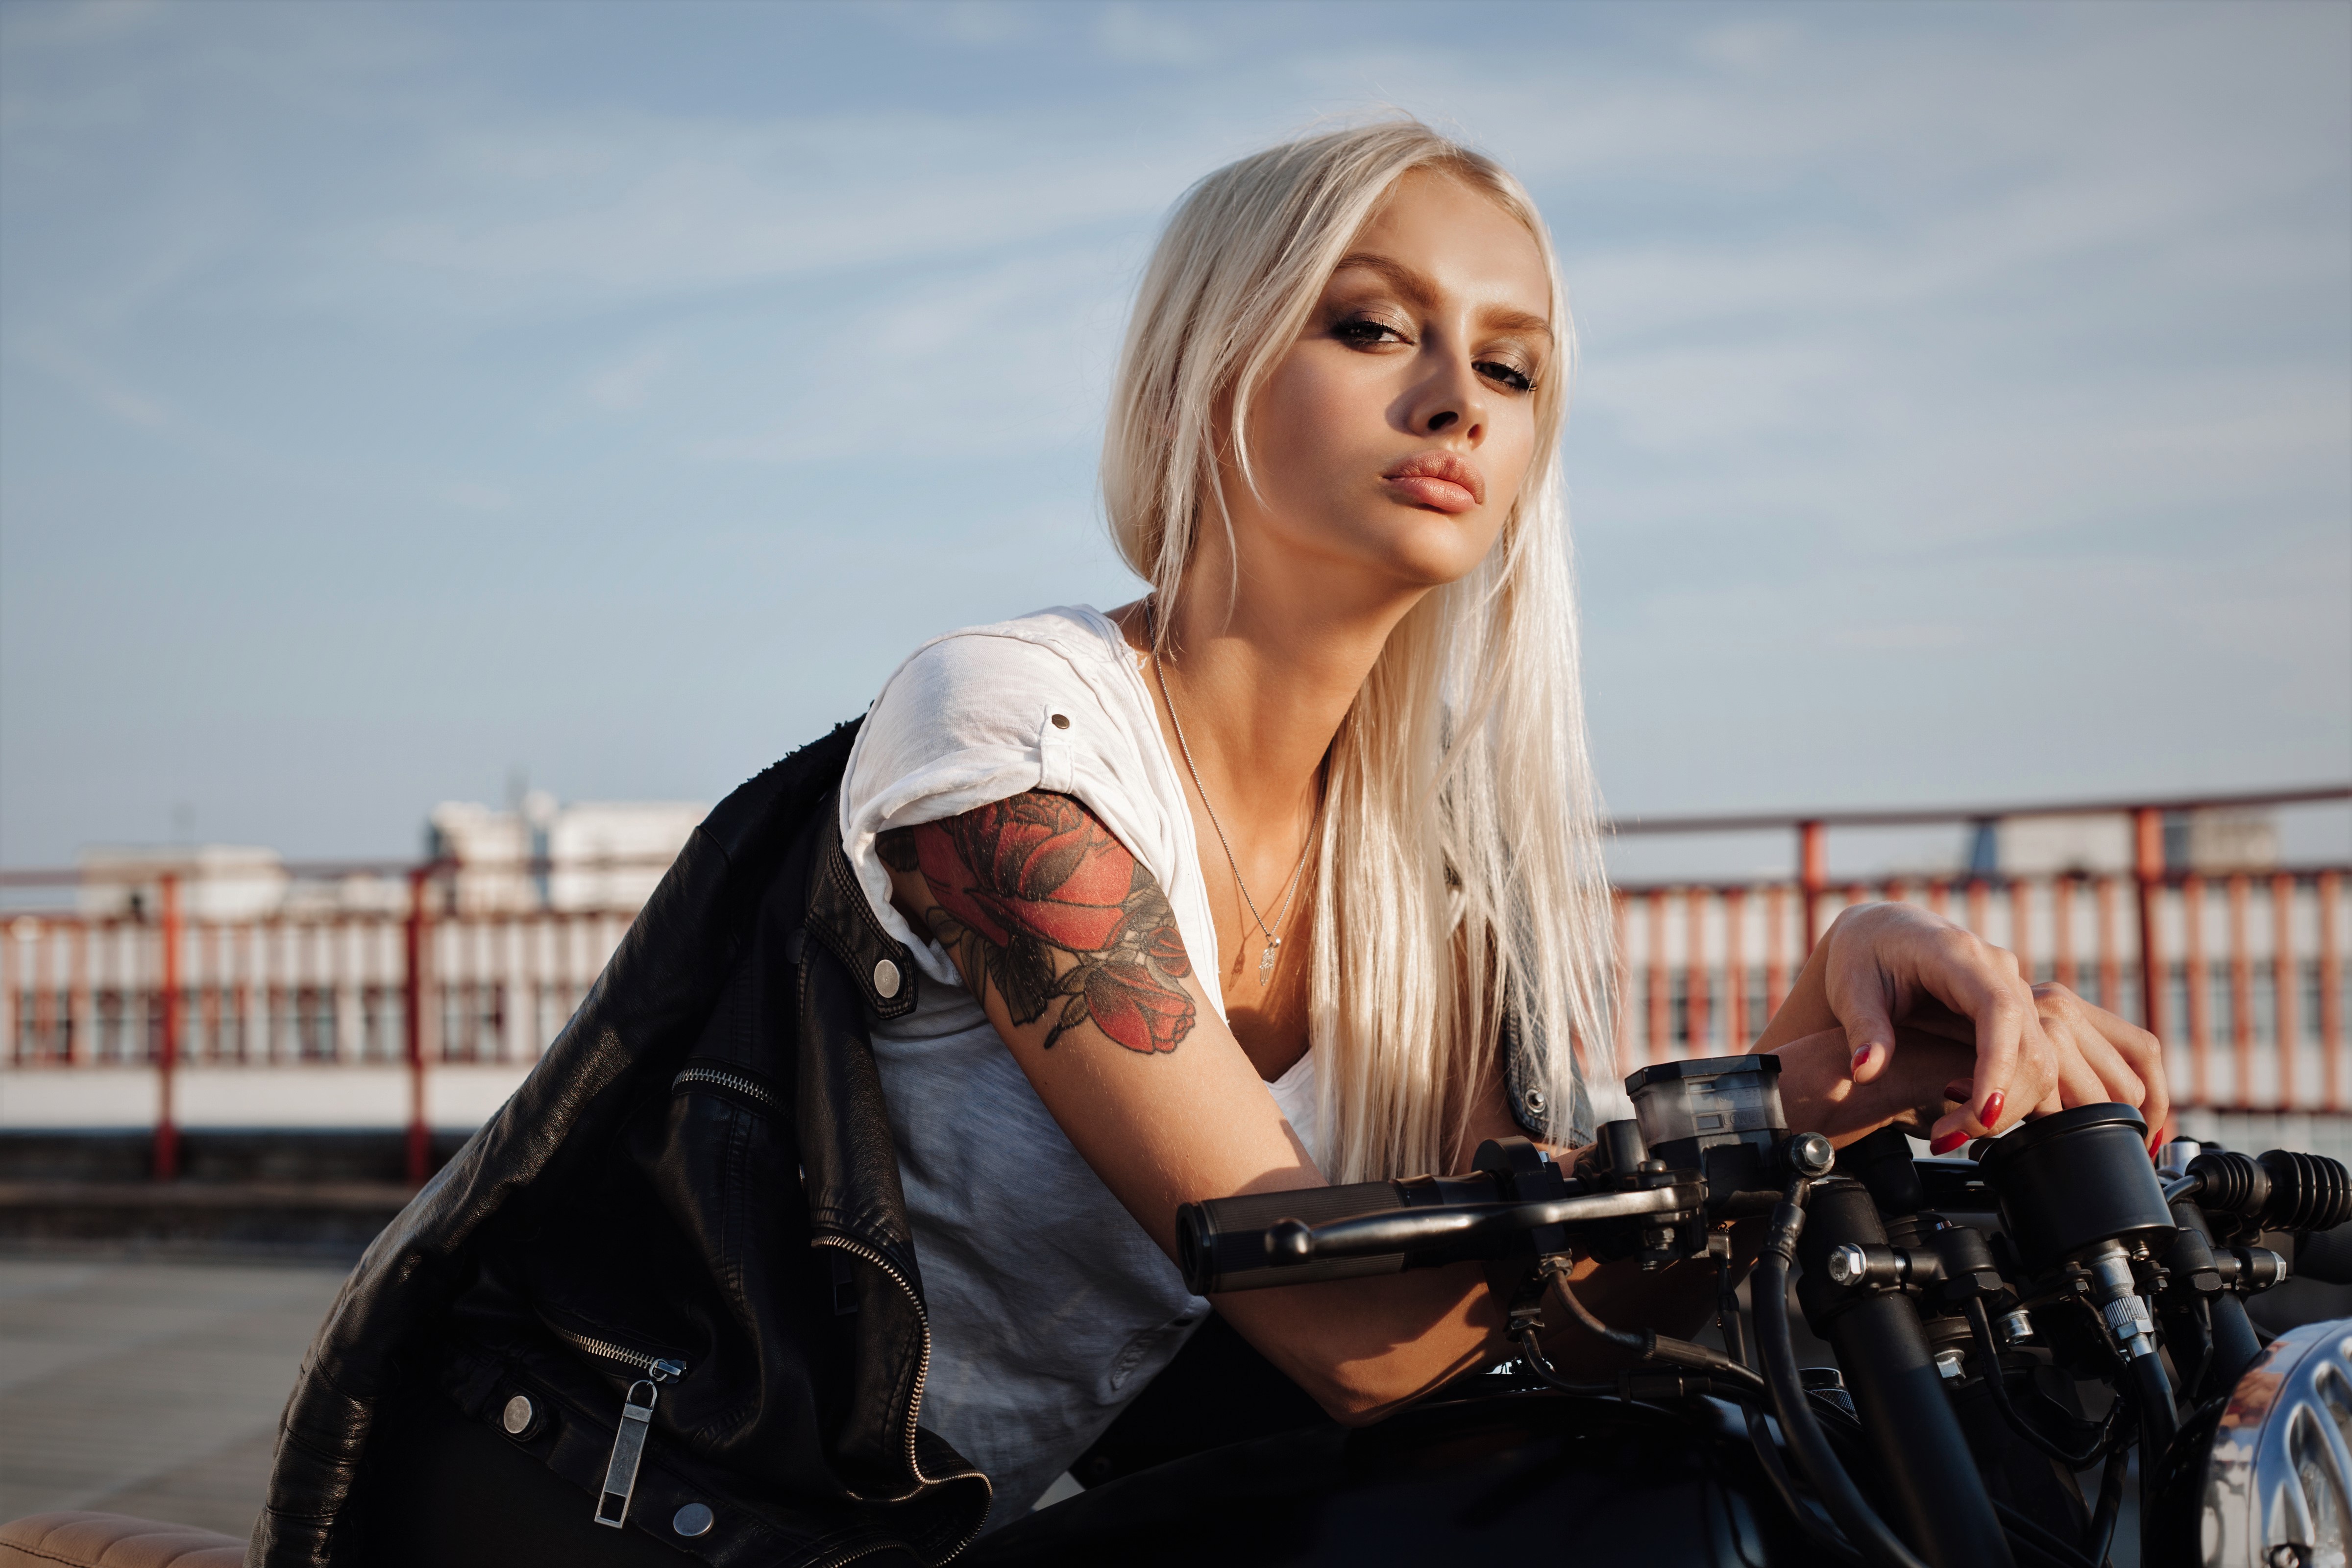 Published On March 23, 2018 - Hd Wallpapers Tattoo Girl 1080p , HD Wallpaper & Backgrounds